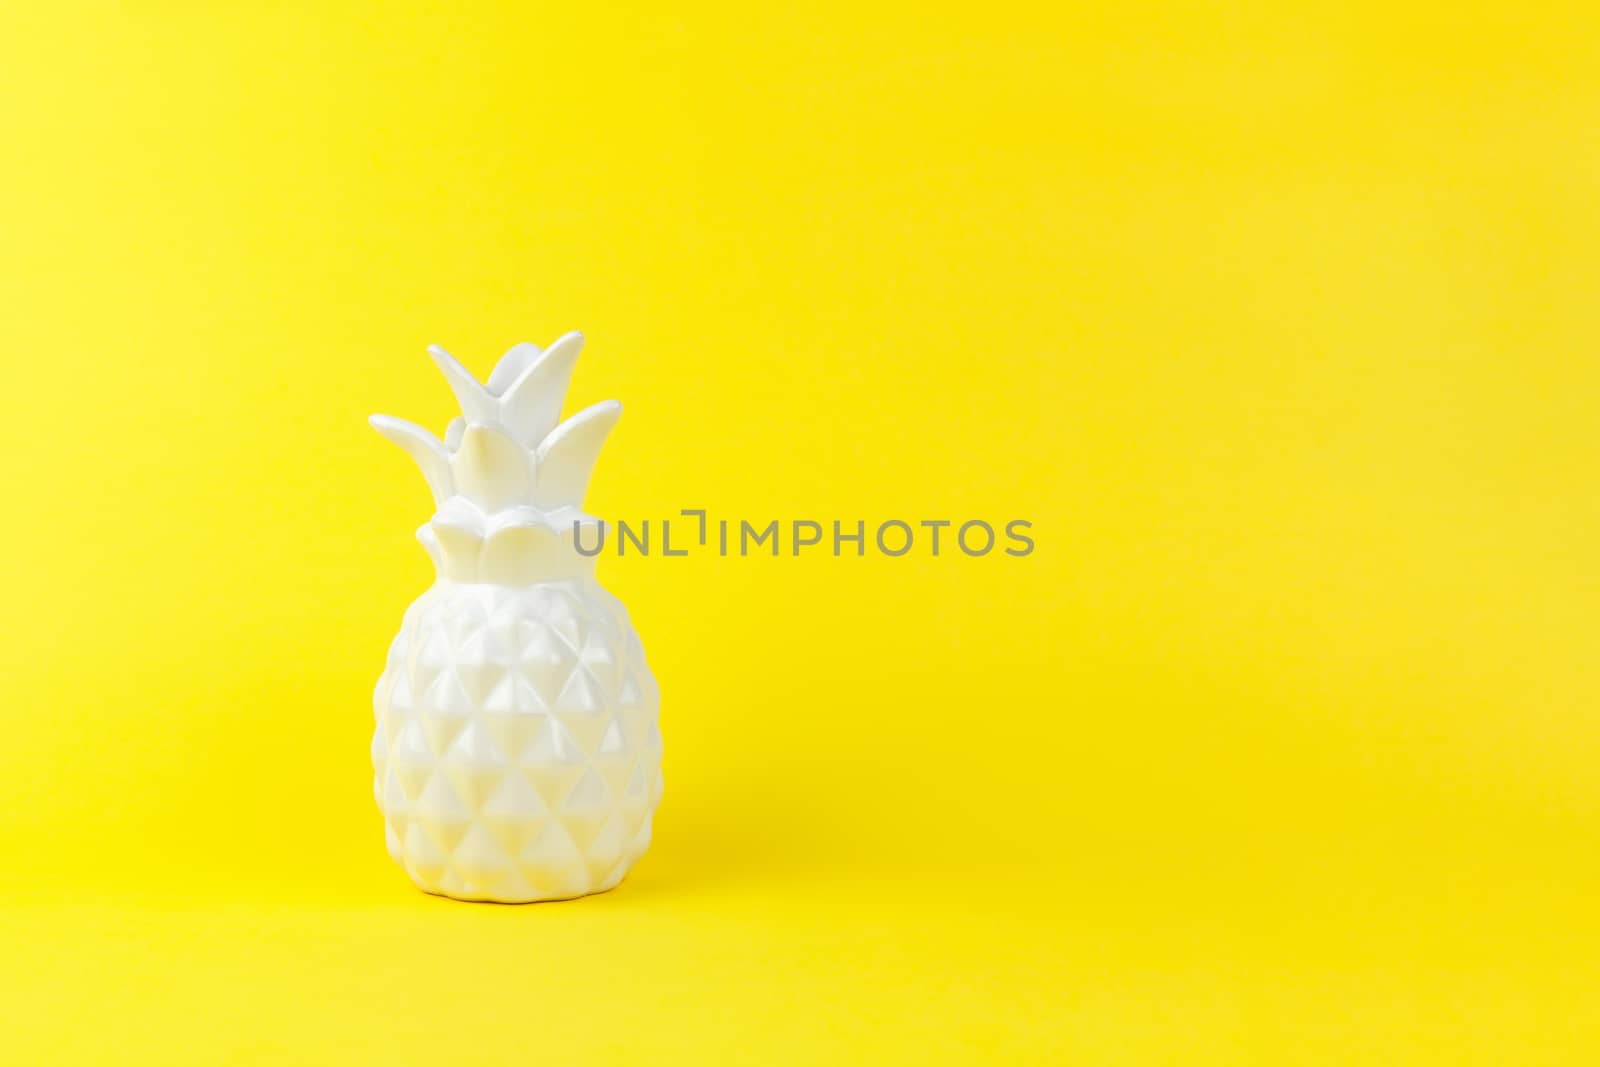 Trendy piece of interior white glossy ceramic pineapple on yellow paper background, copy space. Minimal style of decor concept. Horizontal. For lifestyle, interior blog, social media, poster.